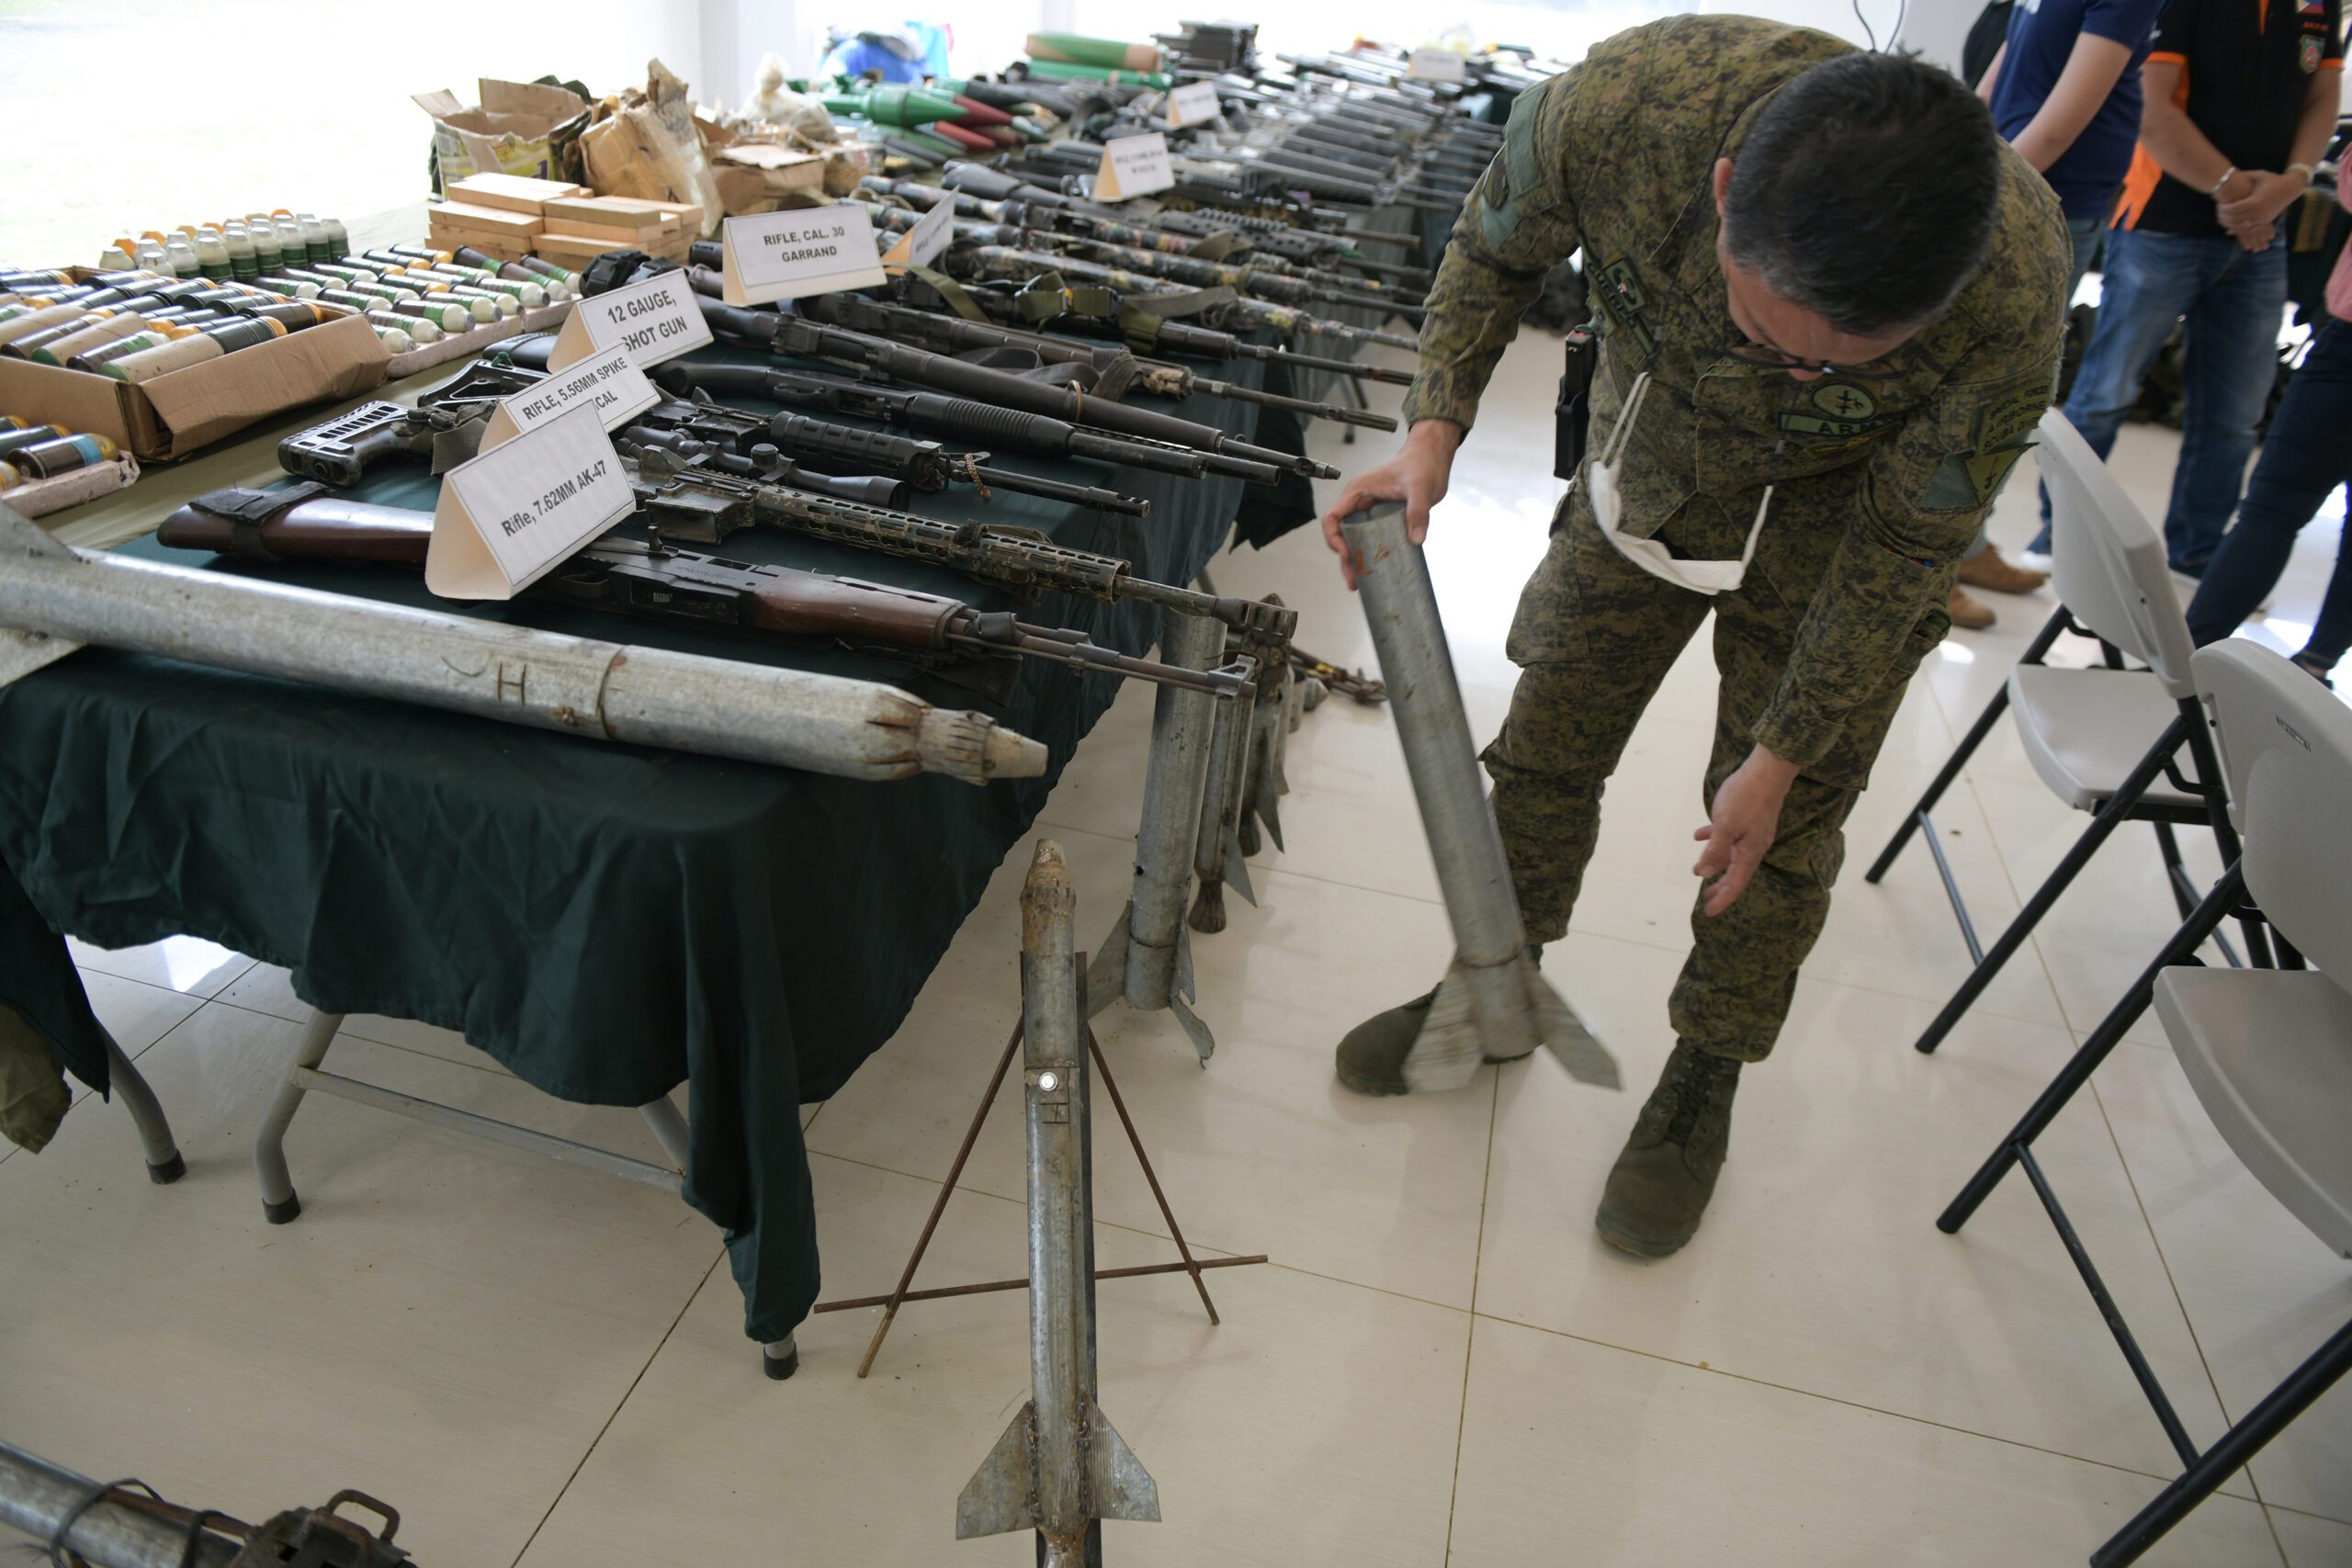 Seized rocket components indicate planned terror attacks in Mindanao – military